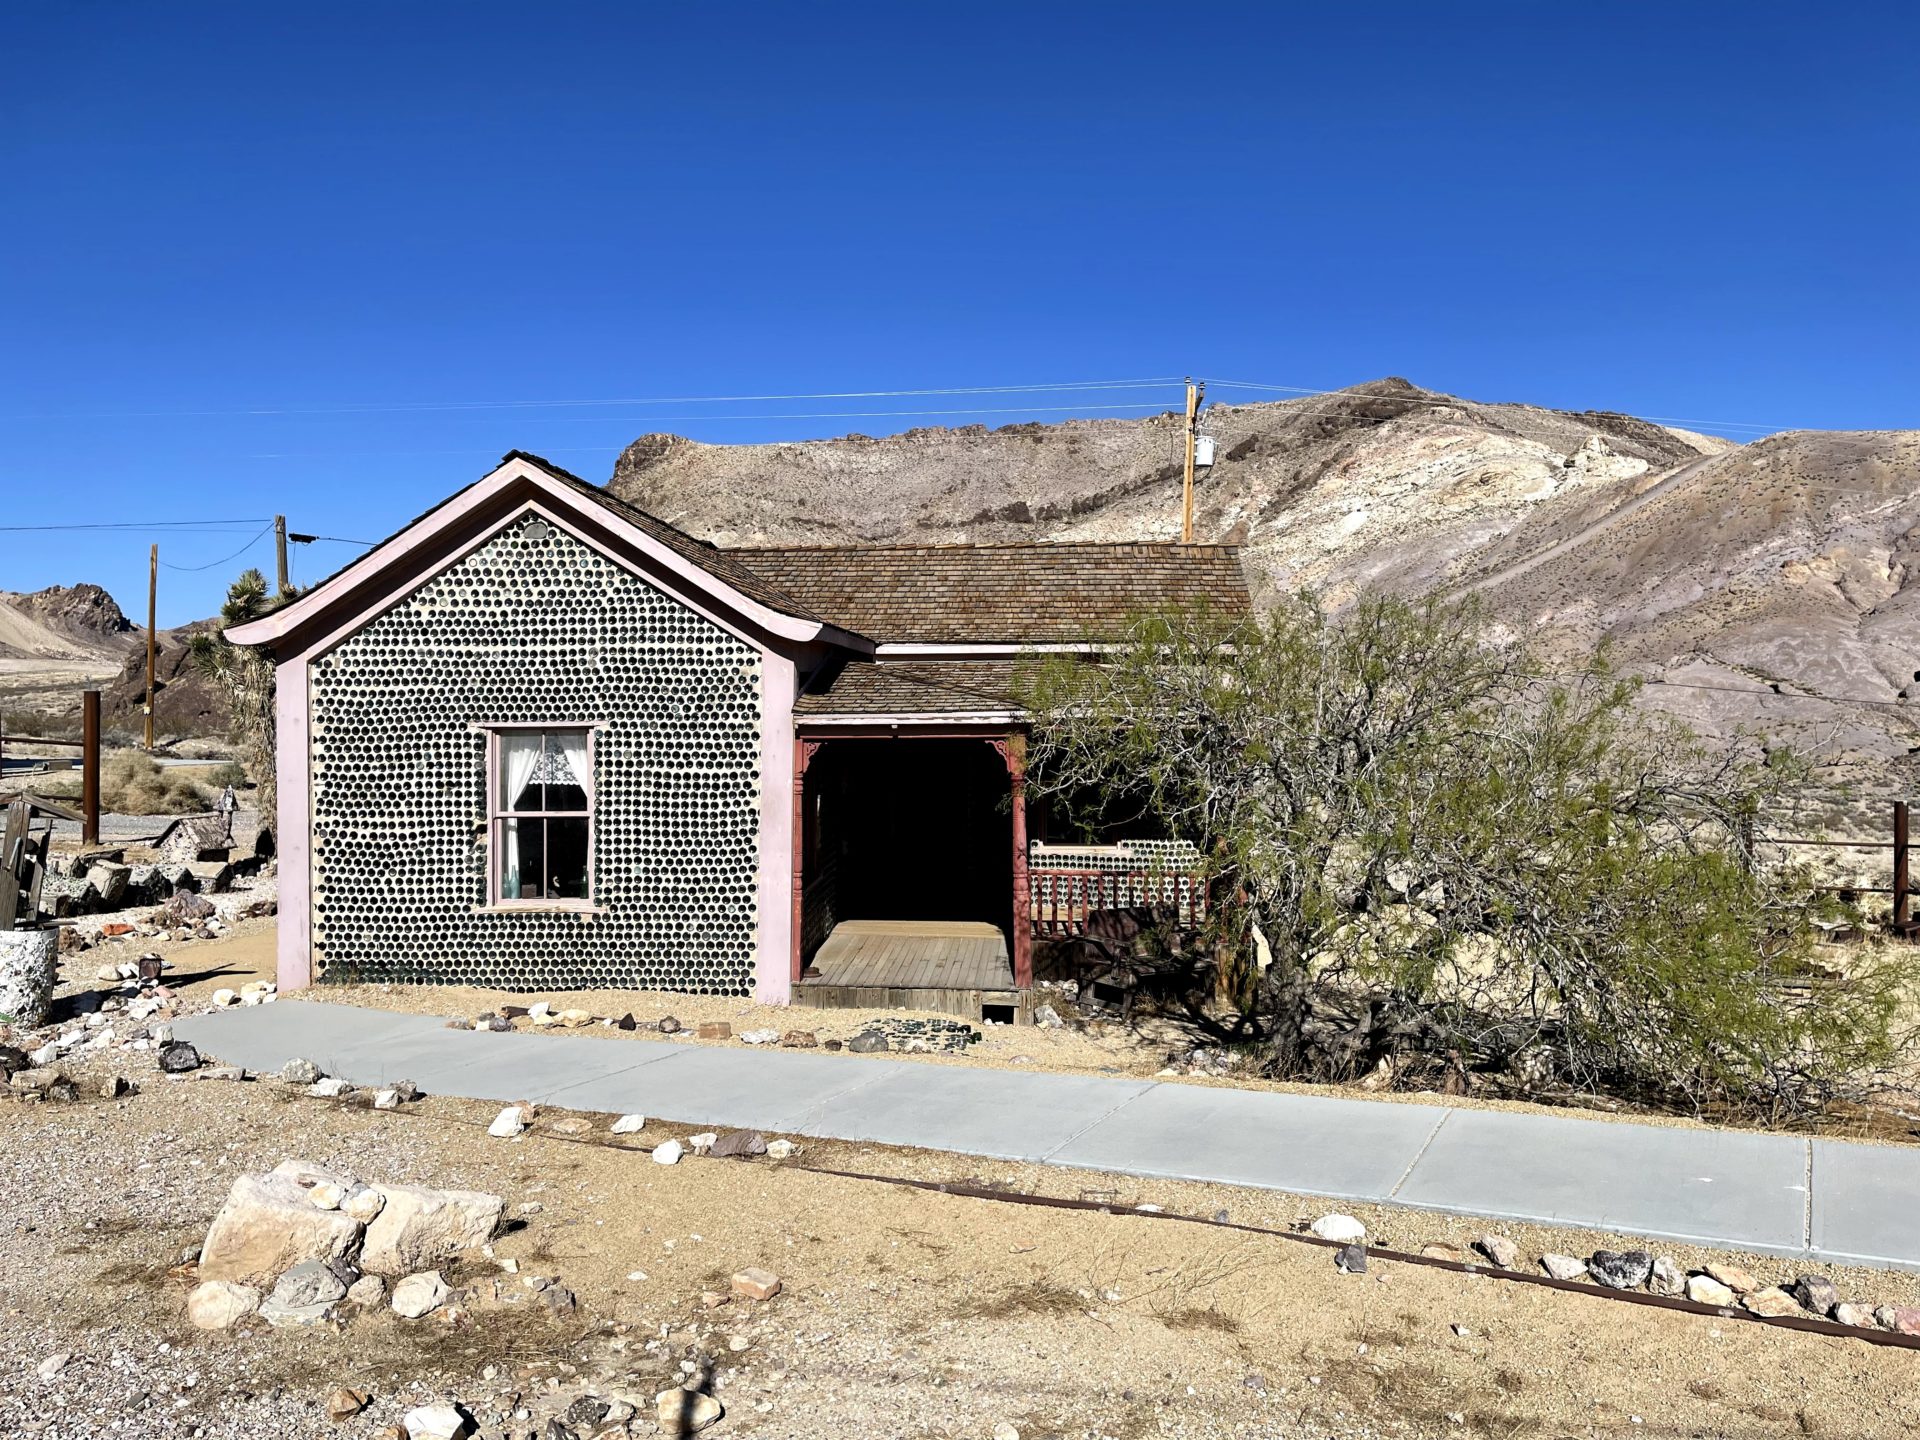 tom kelly bottle house - Rhyolite, Nevada - From Gold Rush Boomtown to Ghost Town